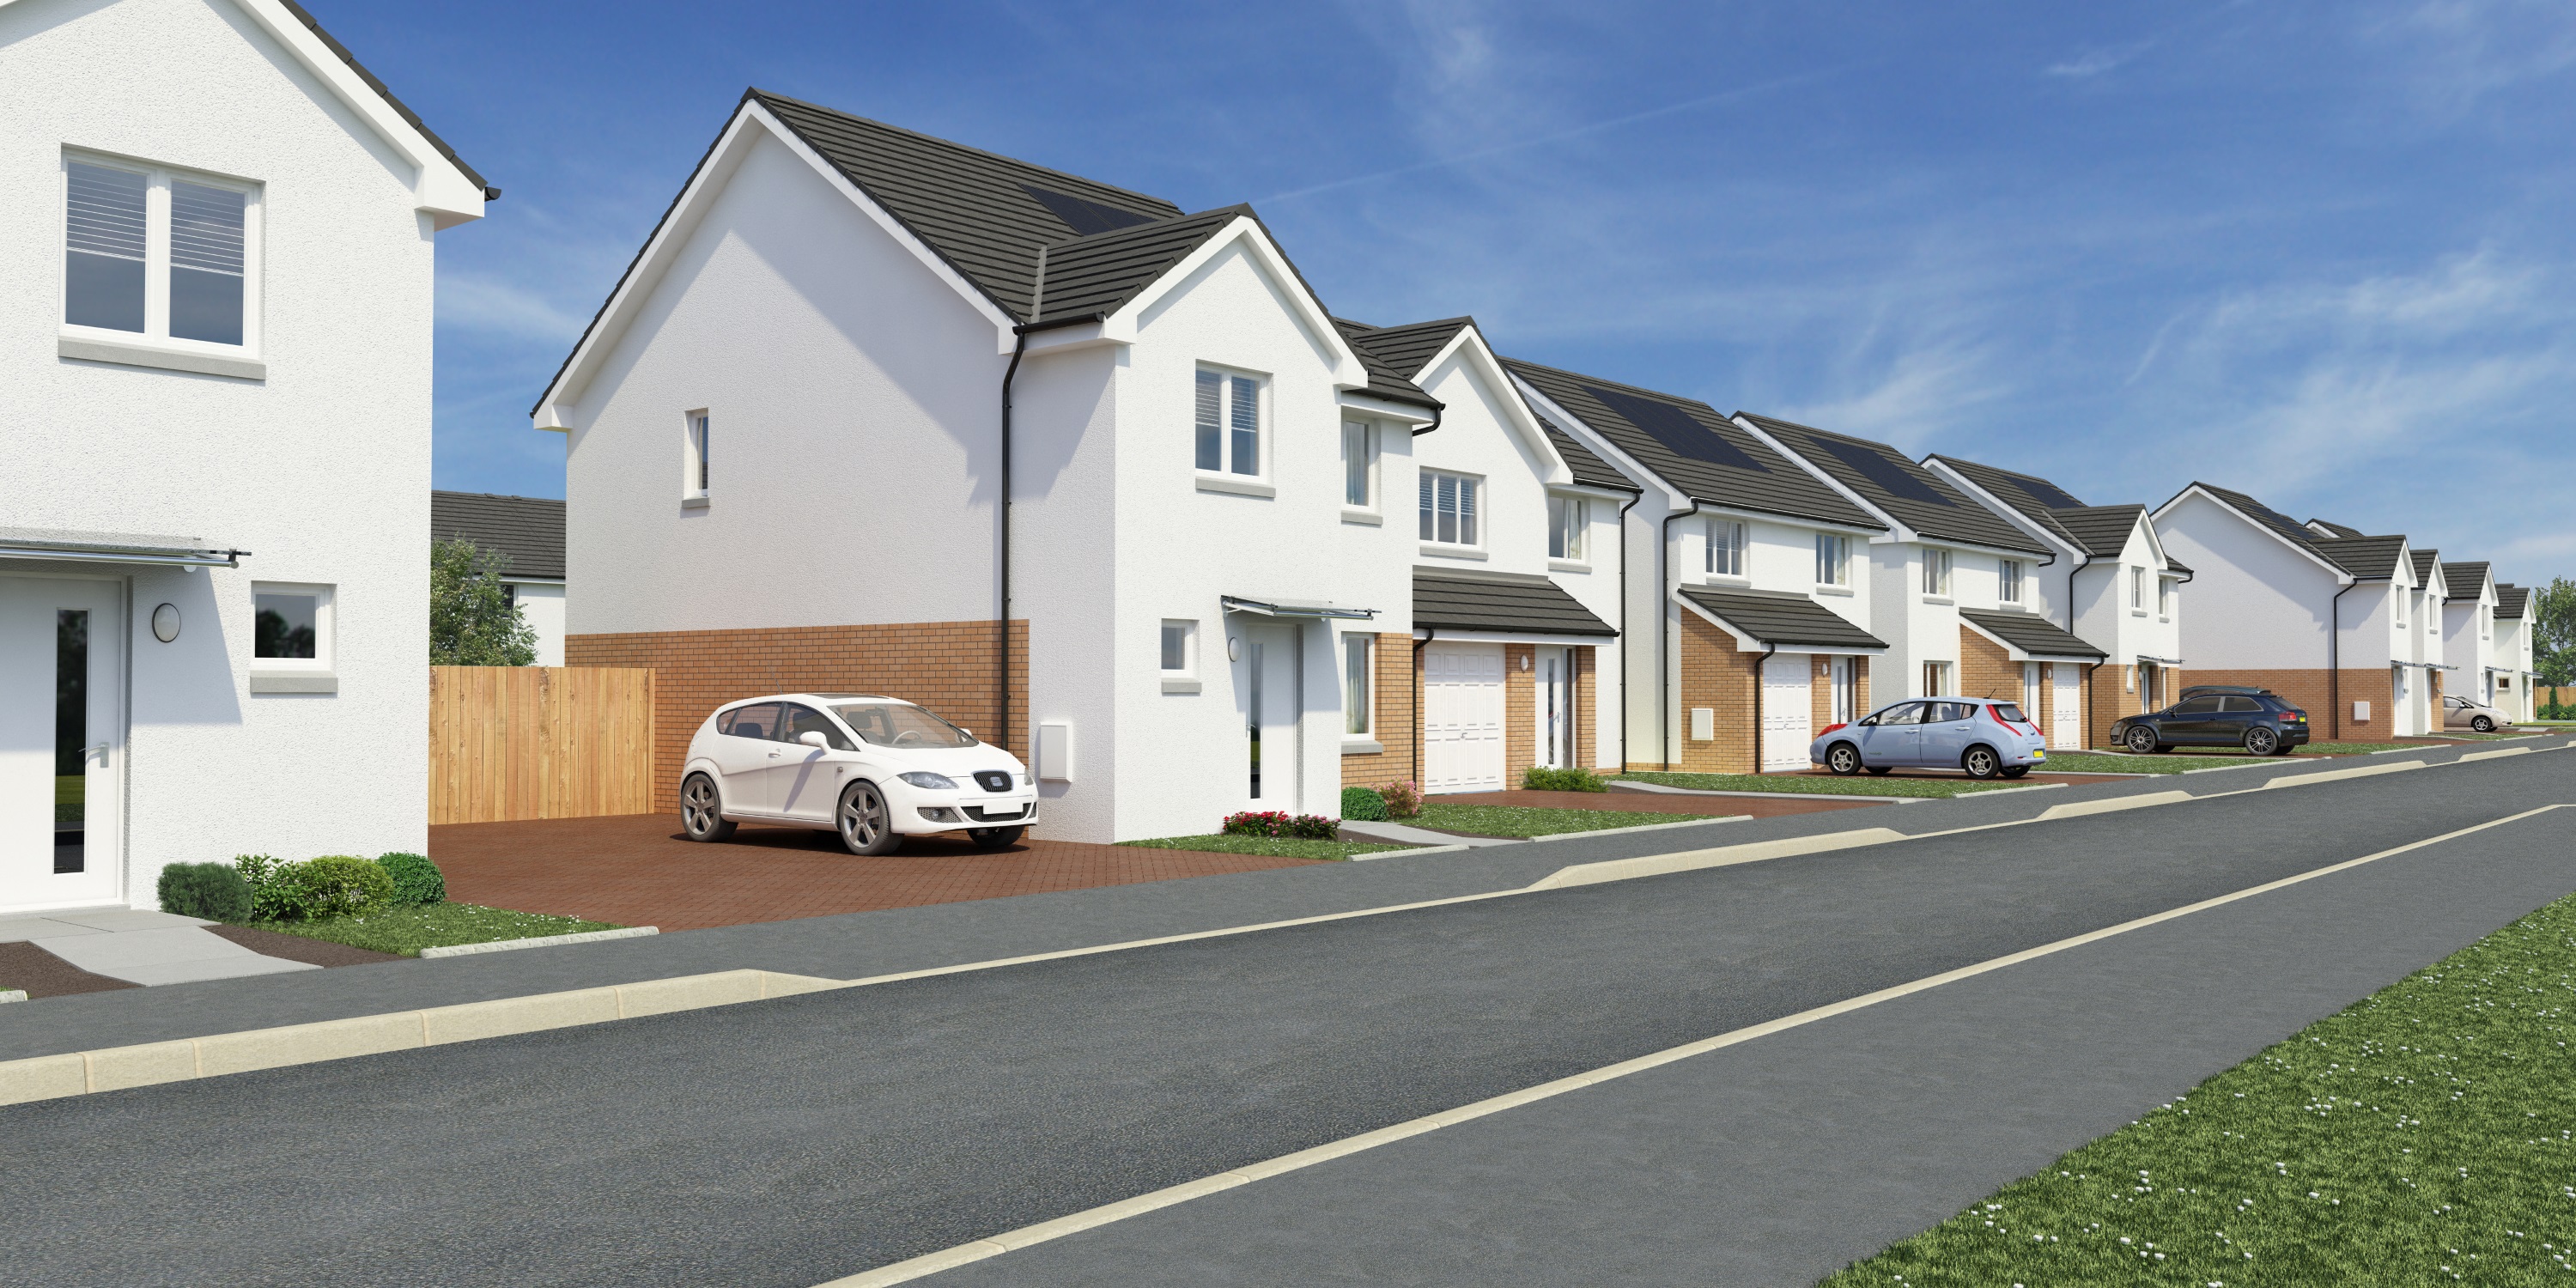 Approval granted for new homes at Glasgow East site